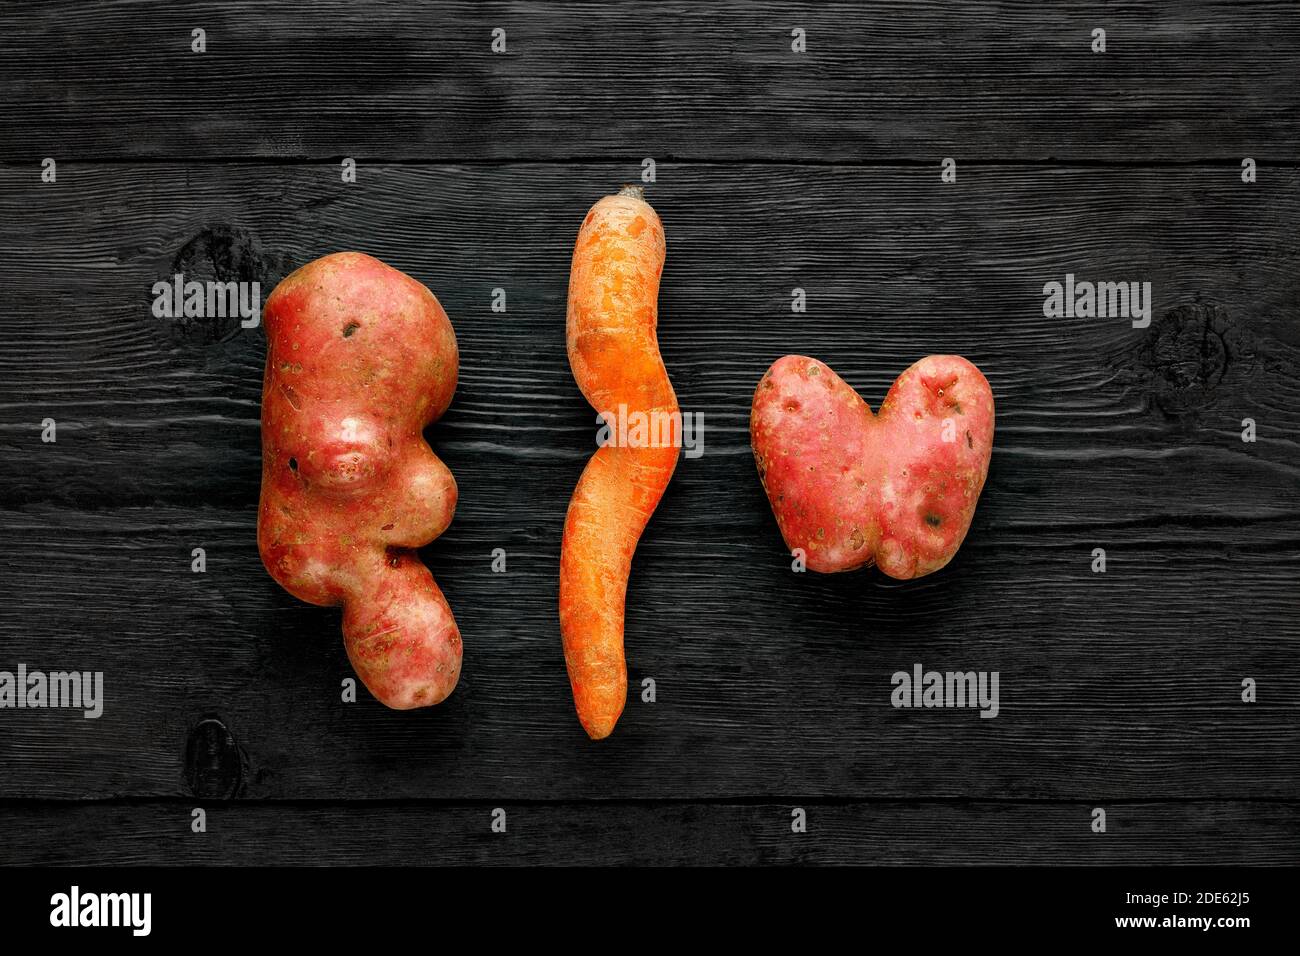 Nice vegetables. Two potatoes of a strange ugly shape and twisted carrots on a black wooden background. Stock Photo